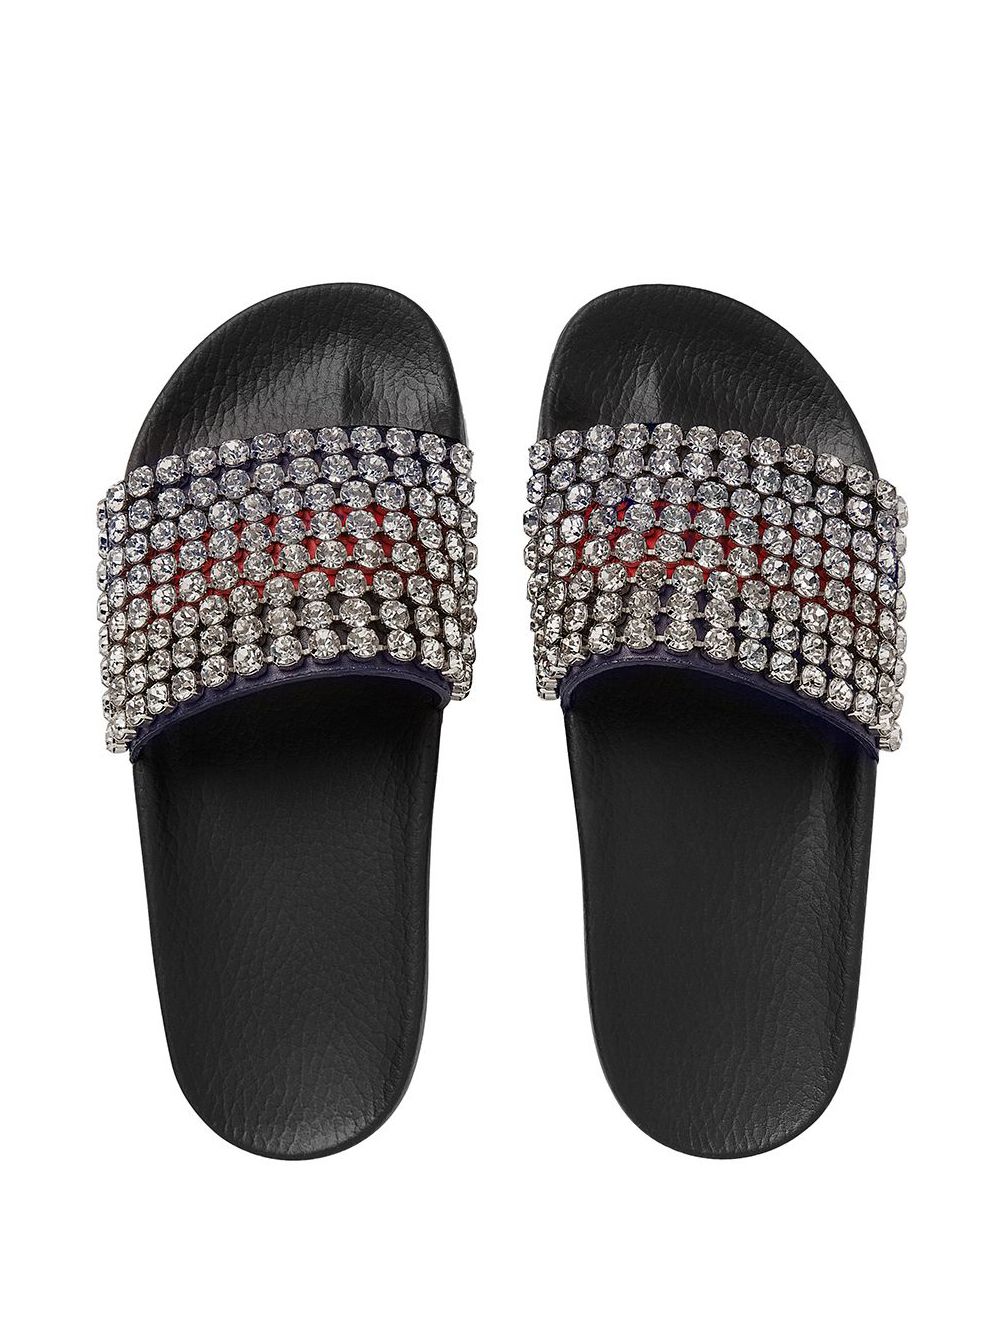 bling gucci slides, OFF 73%,www 